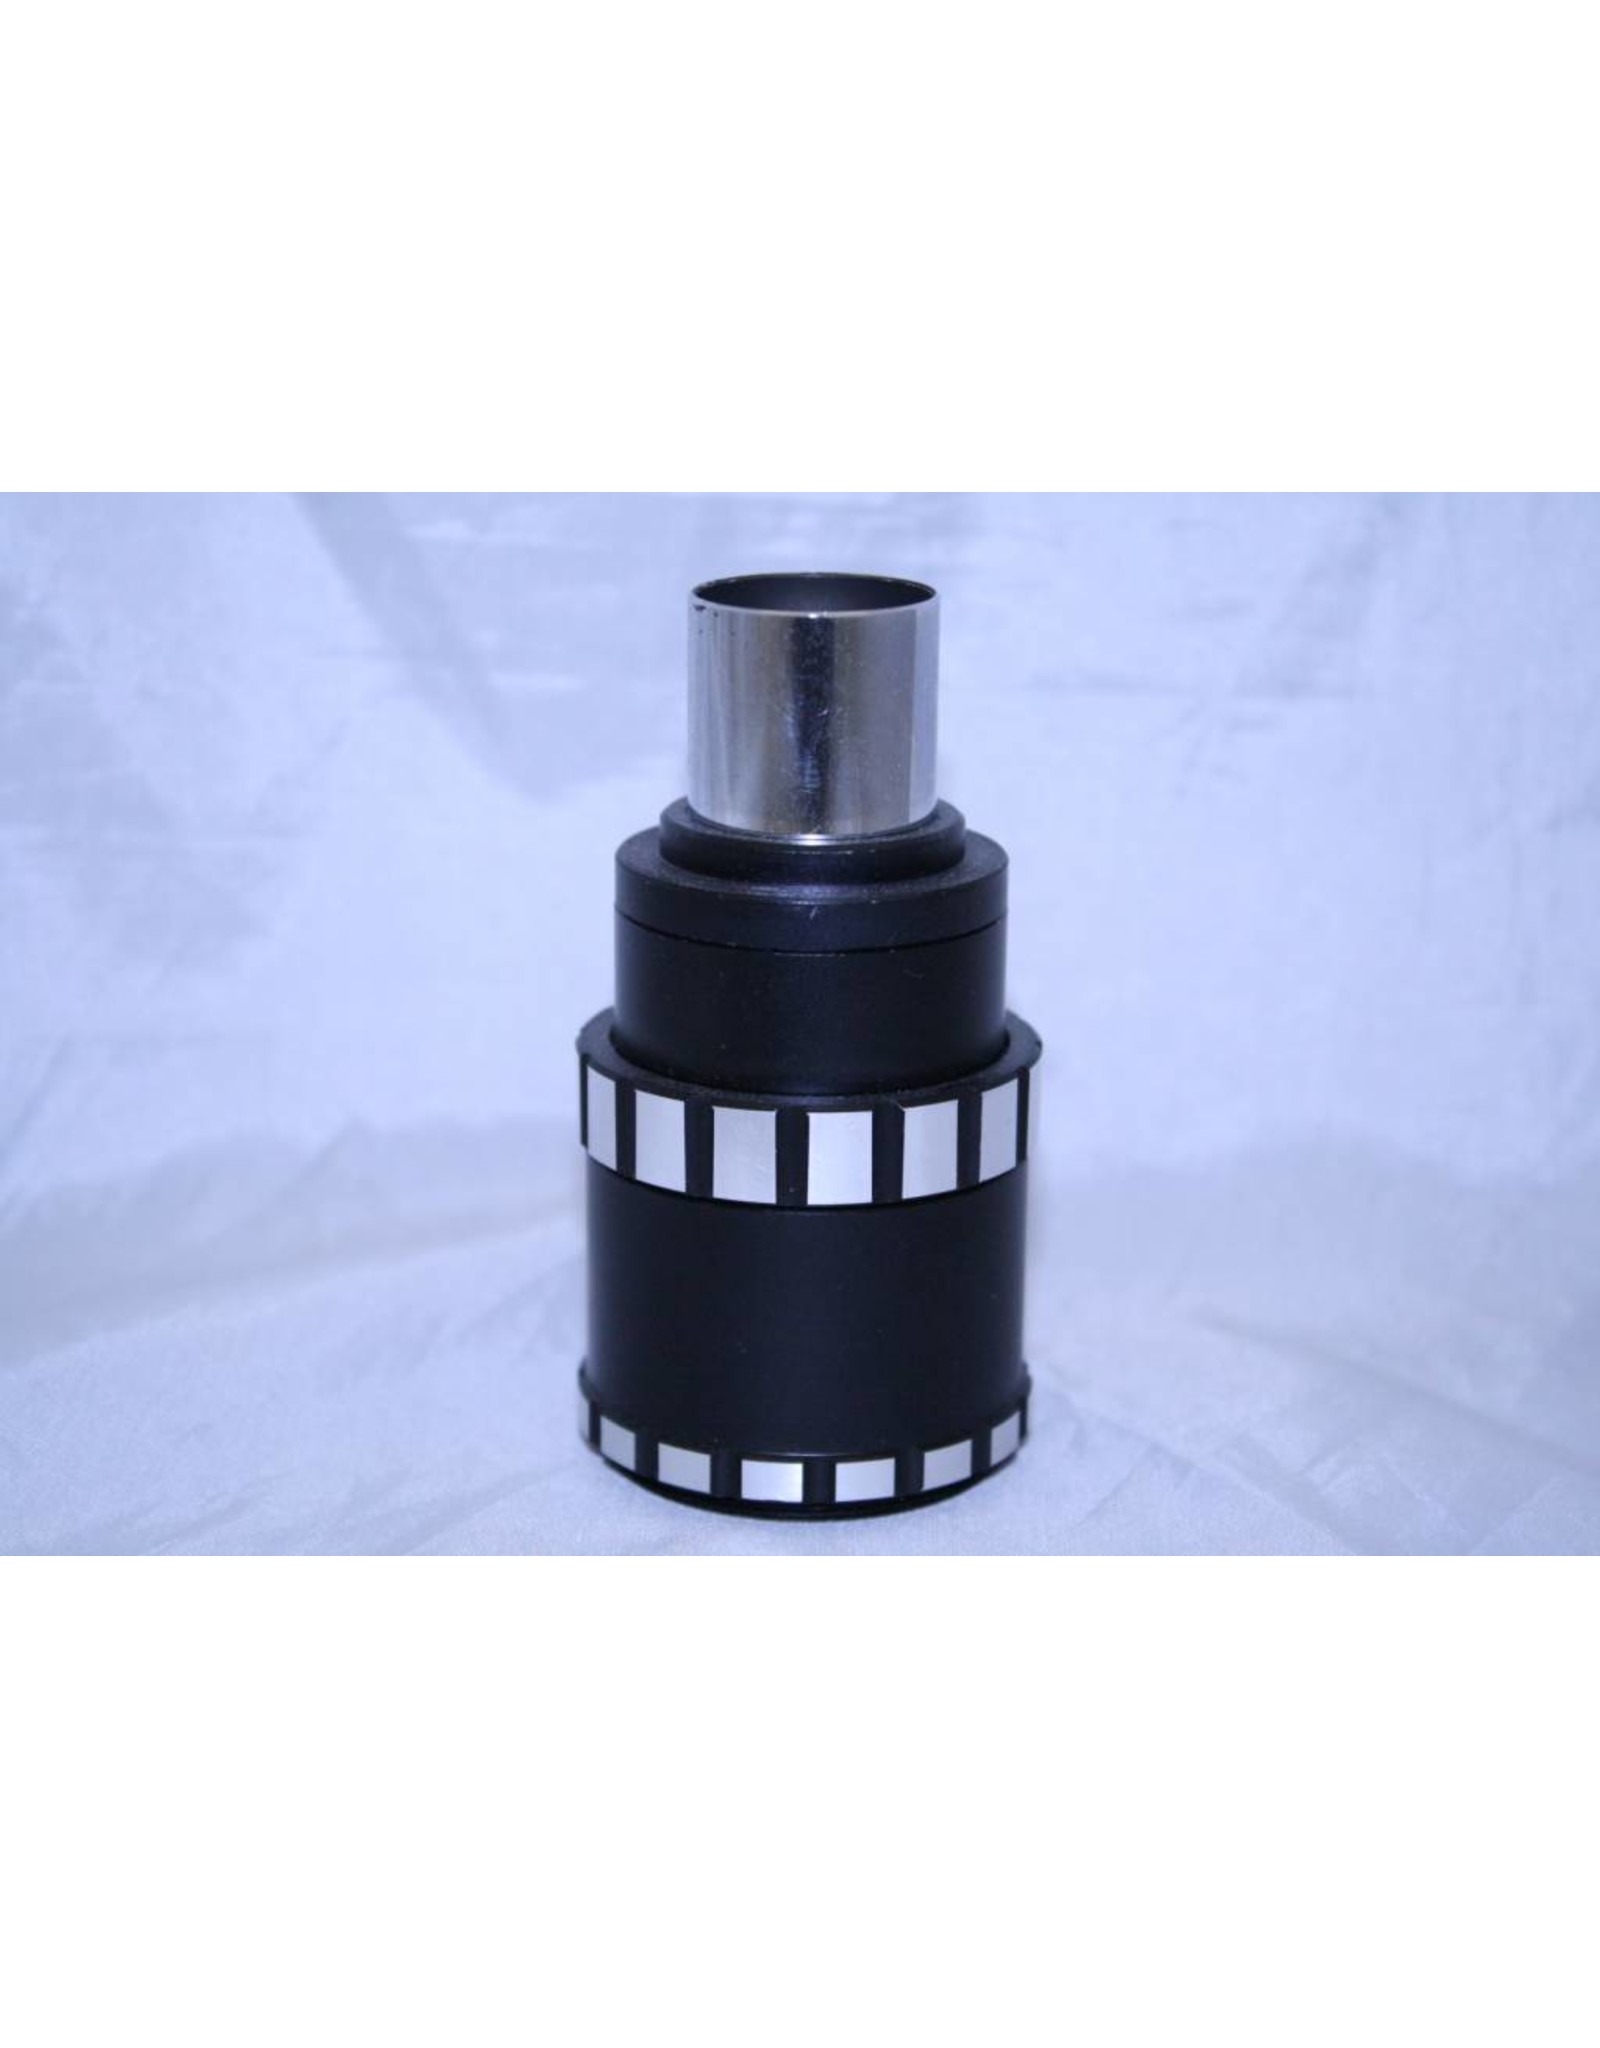 Microscope SLR Camera Adapter (T-Ring Required) (Pre-owned)